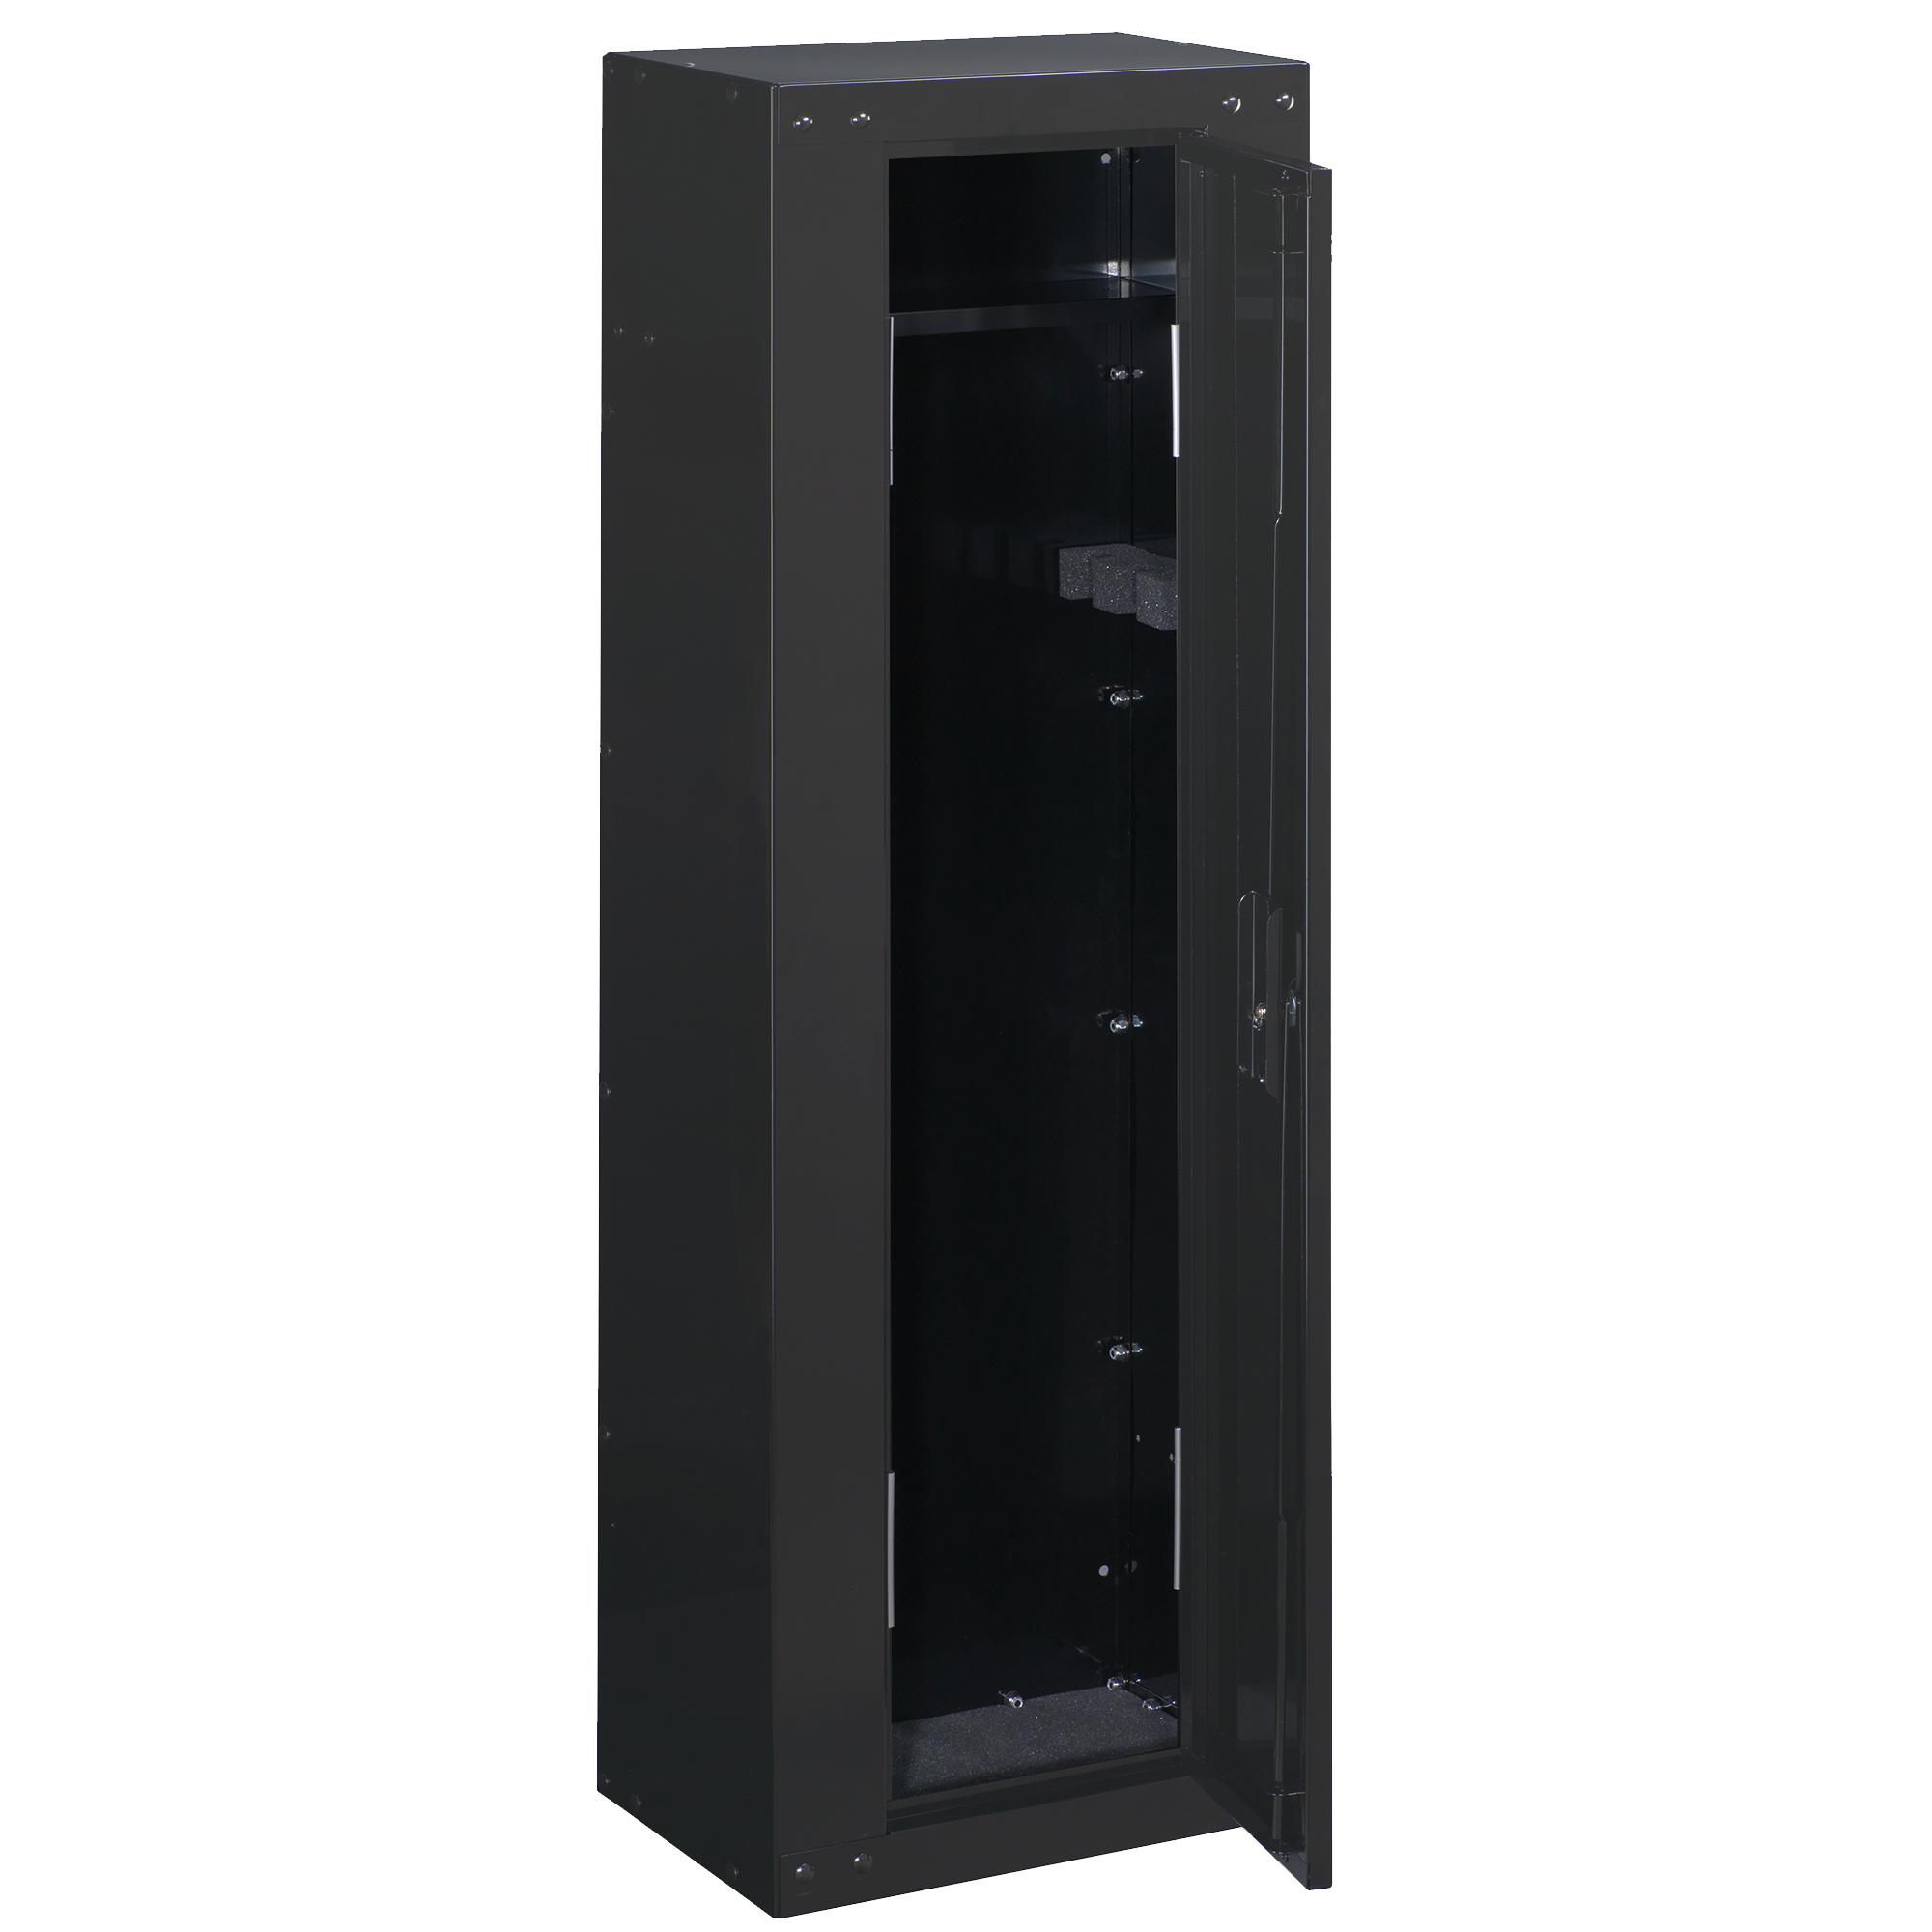 Stack-On GCB-8RTA Steel 8-Gun Ready to Assemble Security Cabinet, Black - image 3 of 4